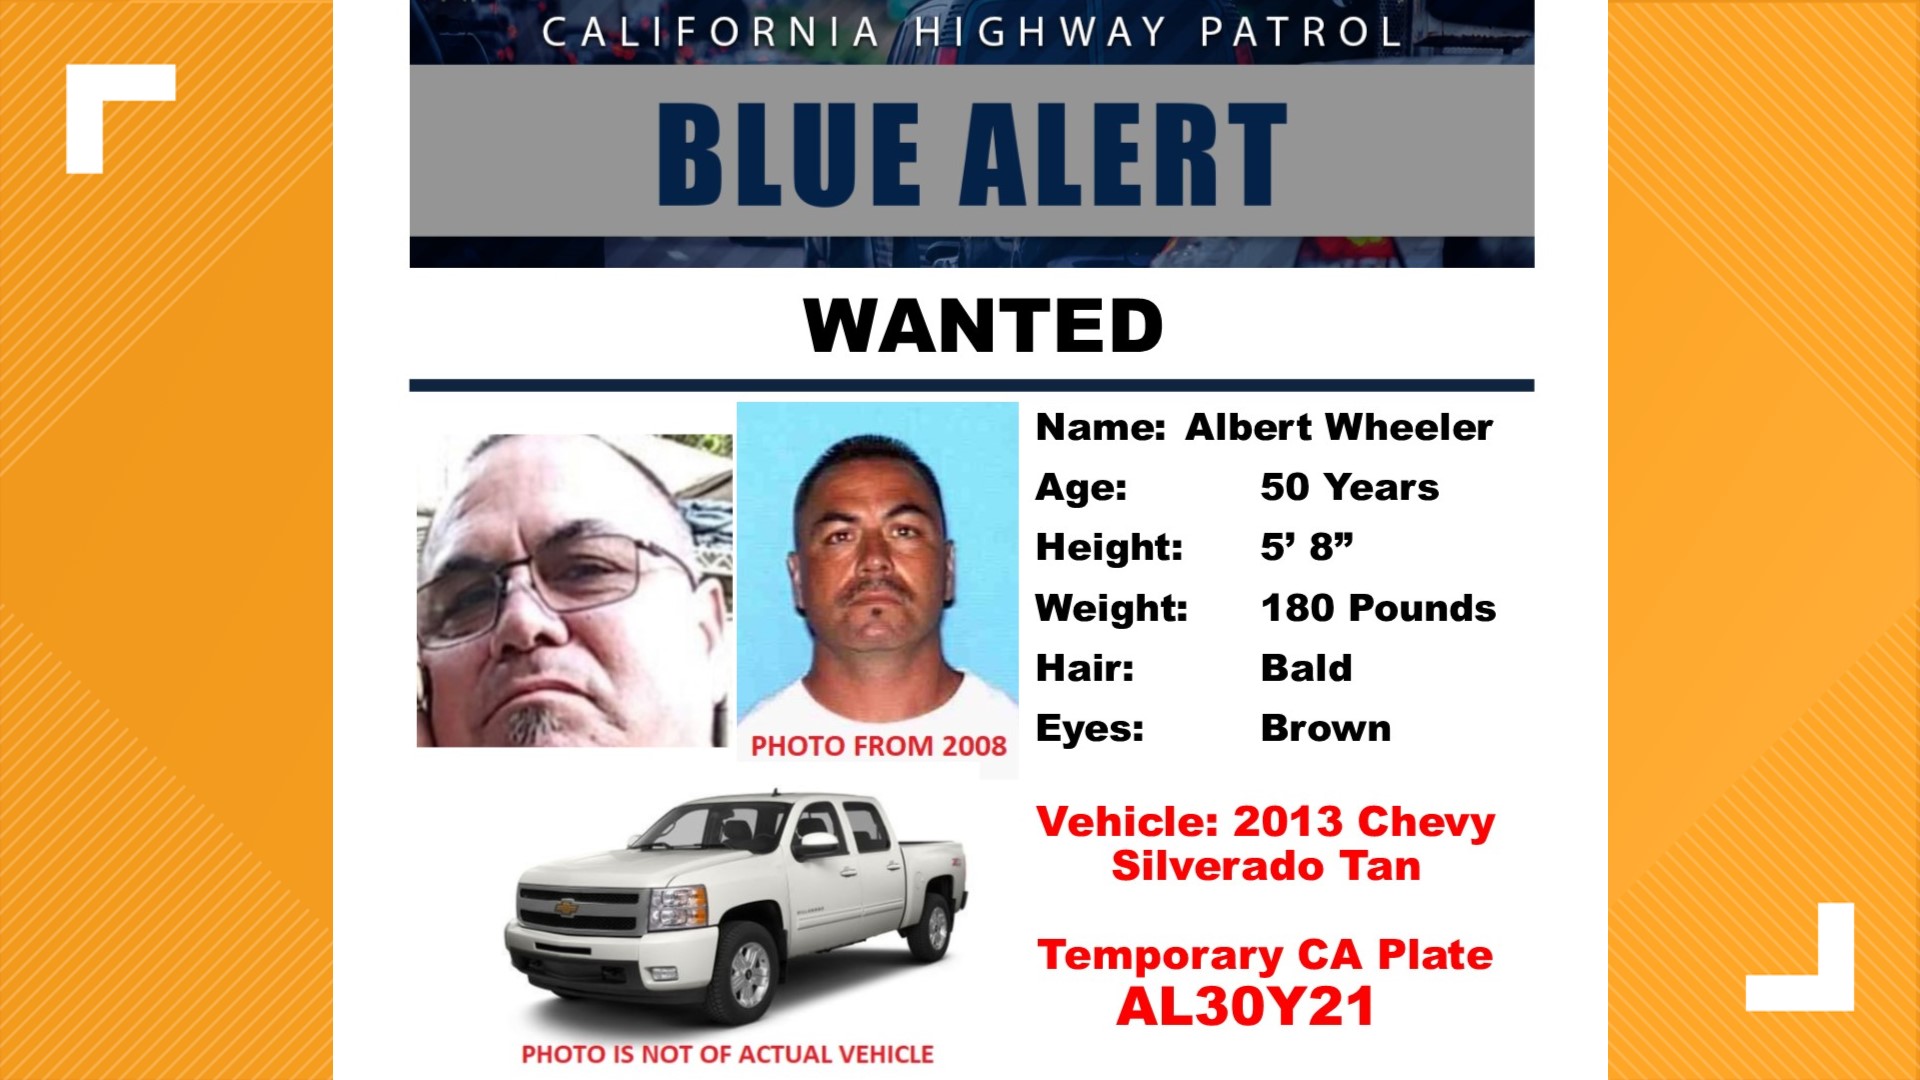 The man was last seen in the area of WB I-80 and Truxel Road driving a tan 2013 Chevy pickup truck with a license plate reading AL30Y21.